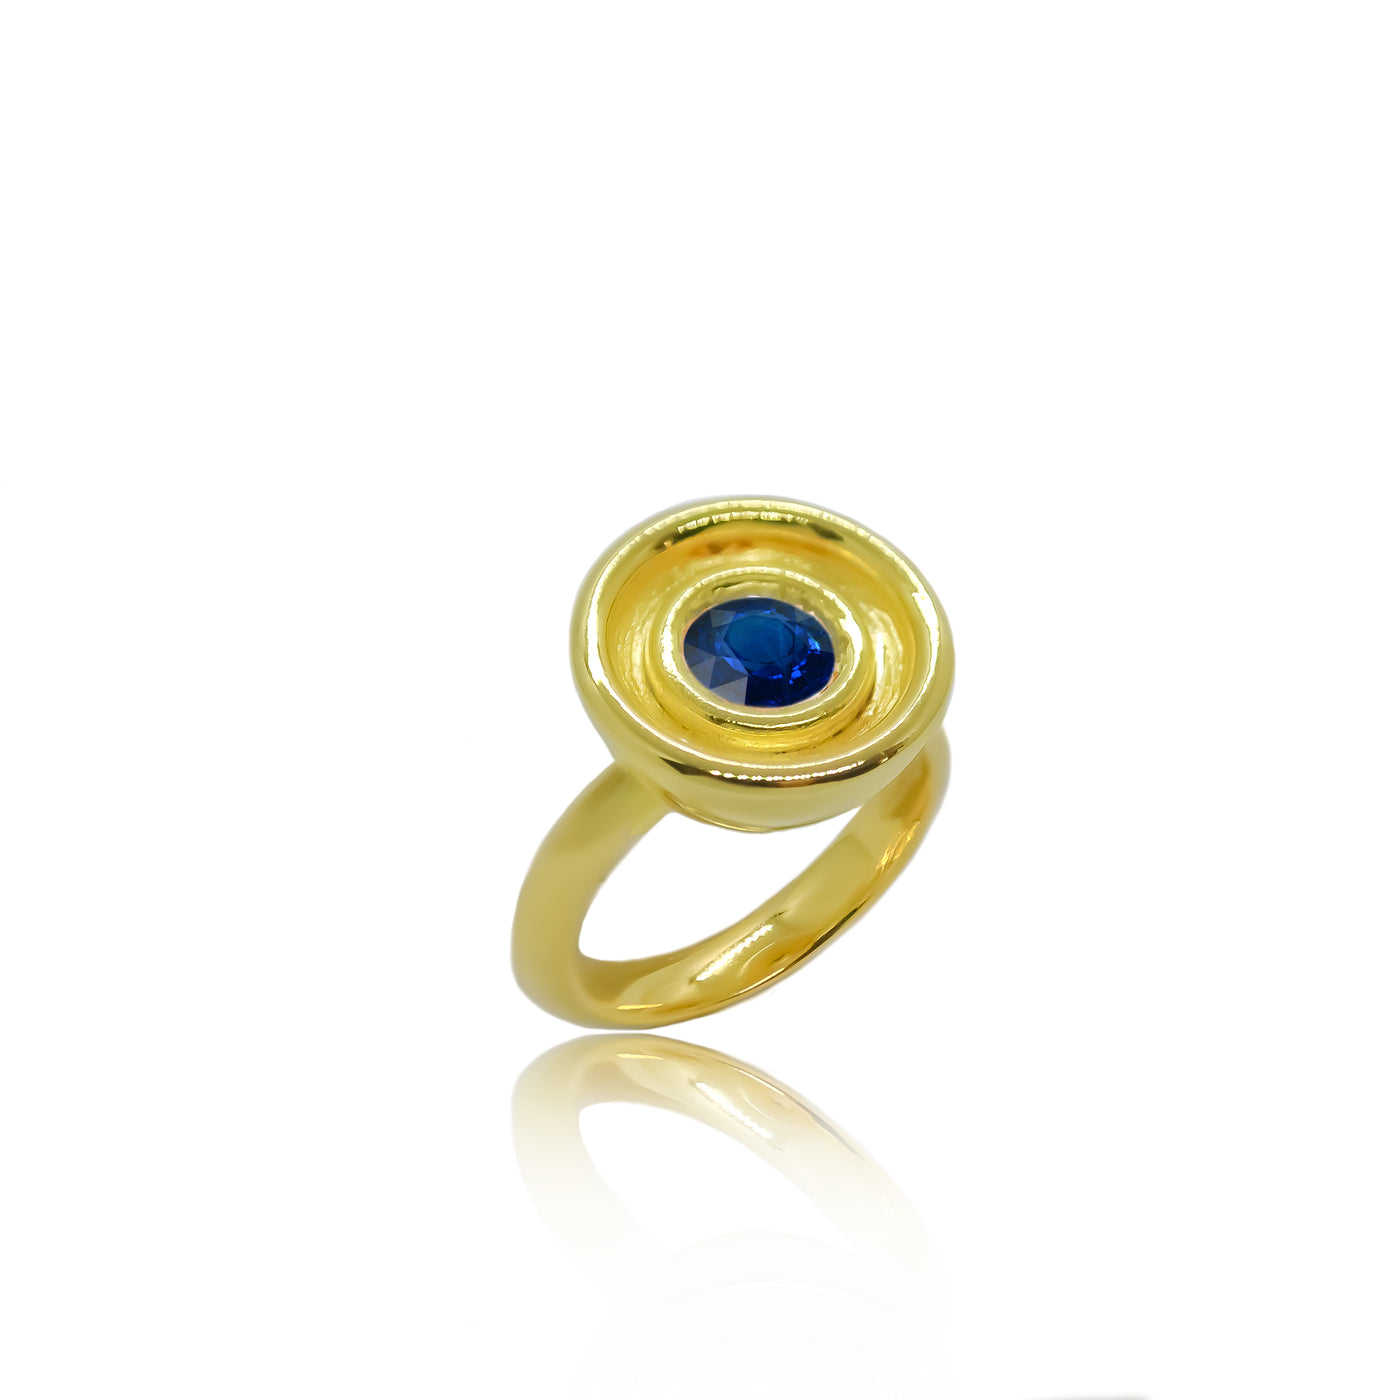 Solitaire cocktail gold ring with blue sapphire from Atelier ORMAN